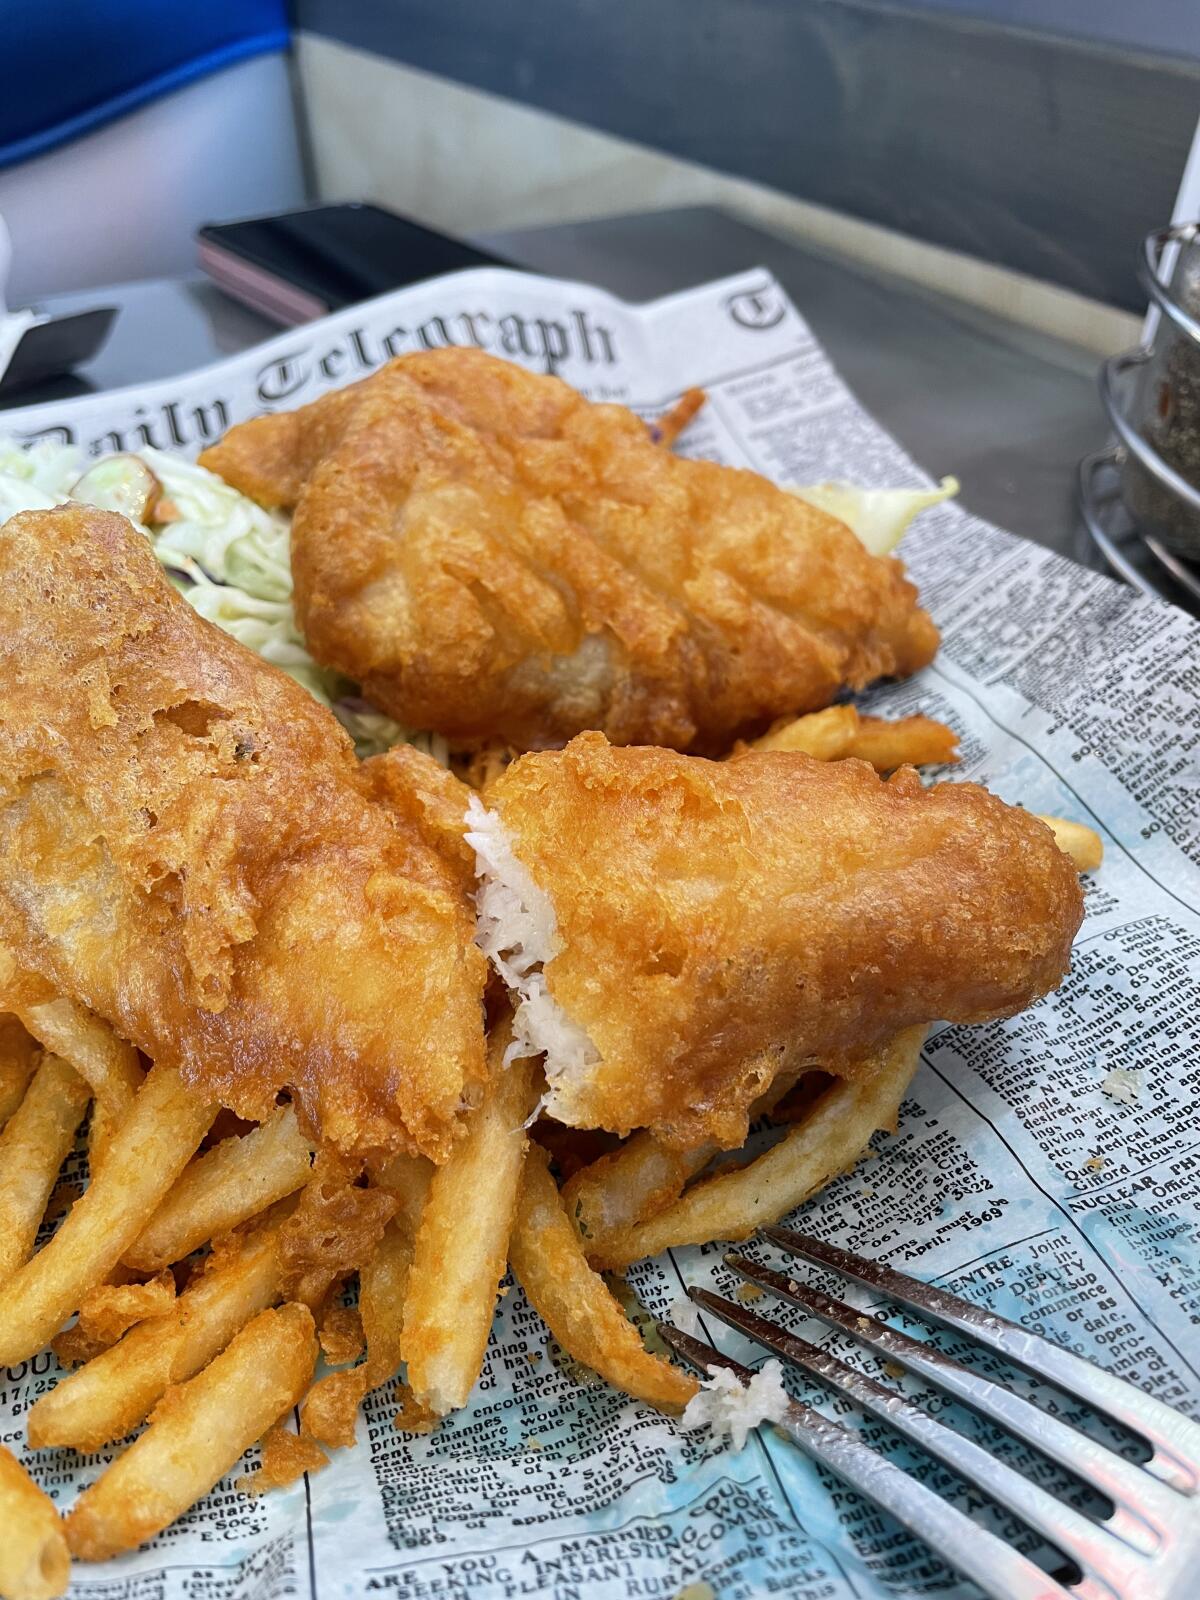 Simply Fish’s fish and chips meal includes three generous pieces of fish, fresh fries, and a serving of cooling coleslaw.